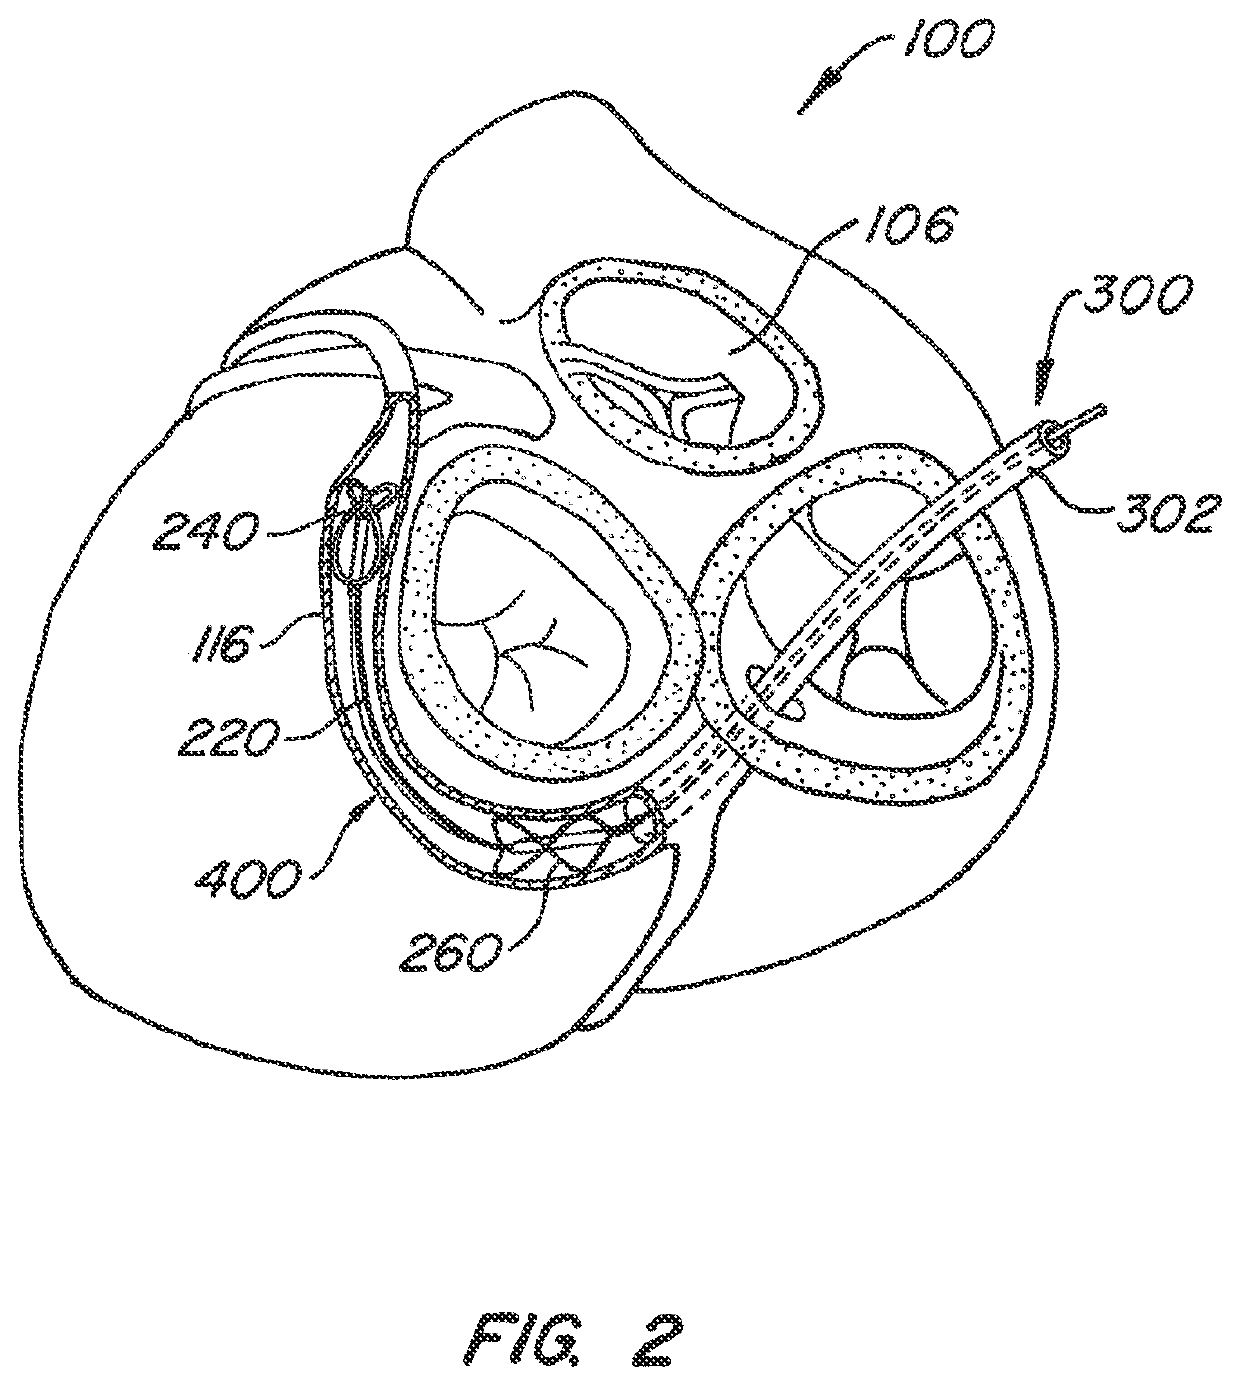 Mitral valve annuloplasty device with twisted anchor